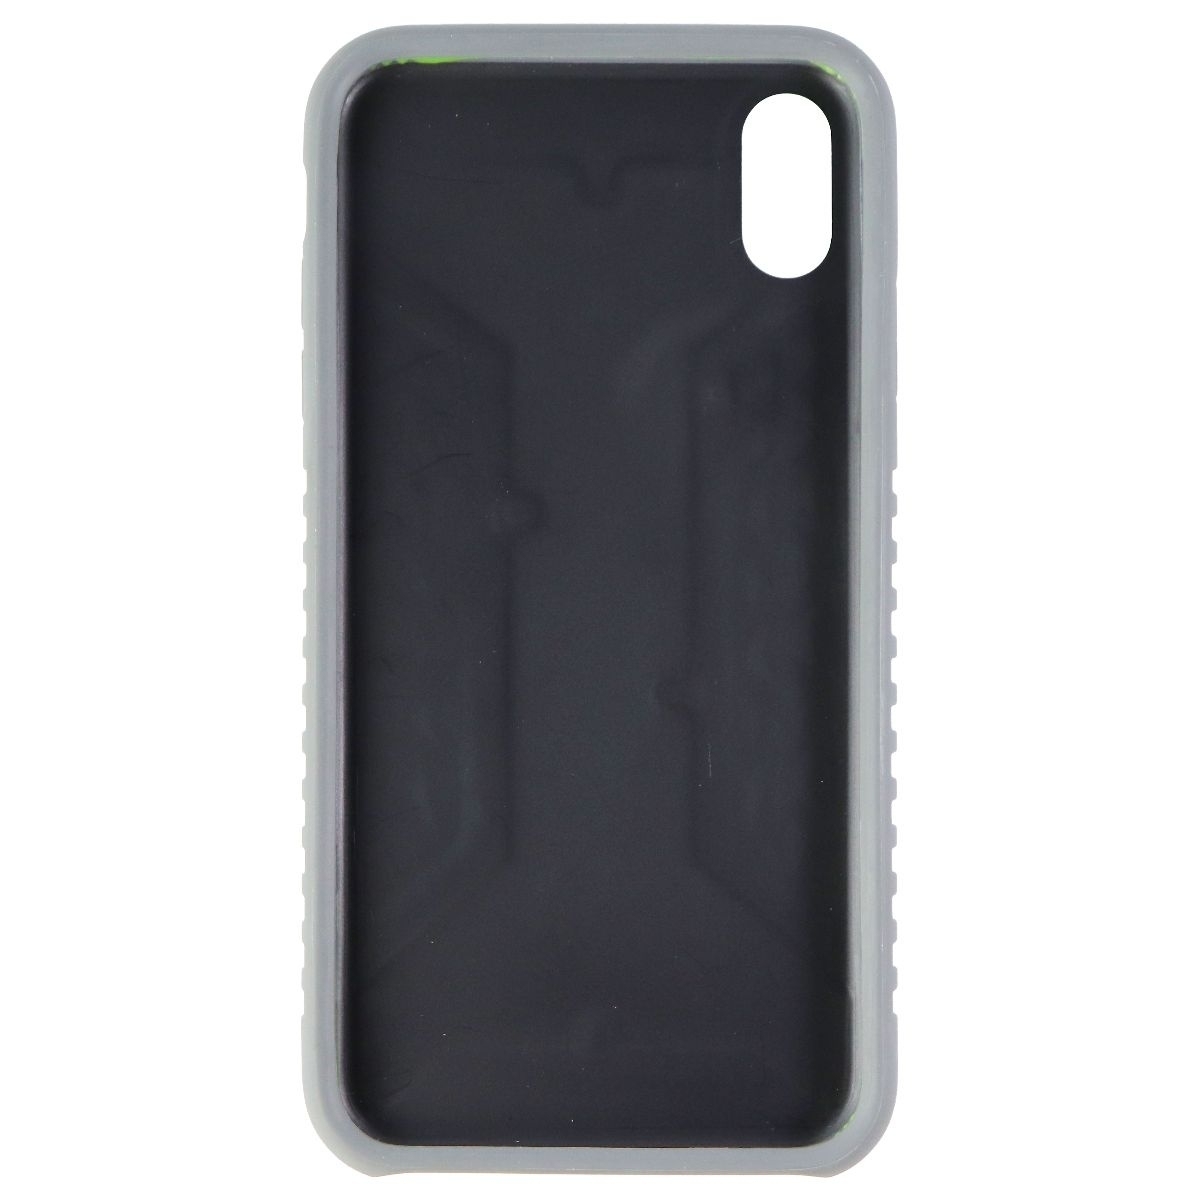 Impact Gel Warrior Series Case For Apple IPhone Xs Max - Black/Gray